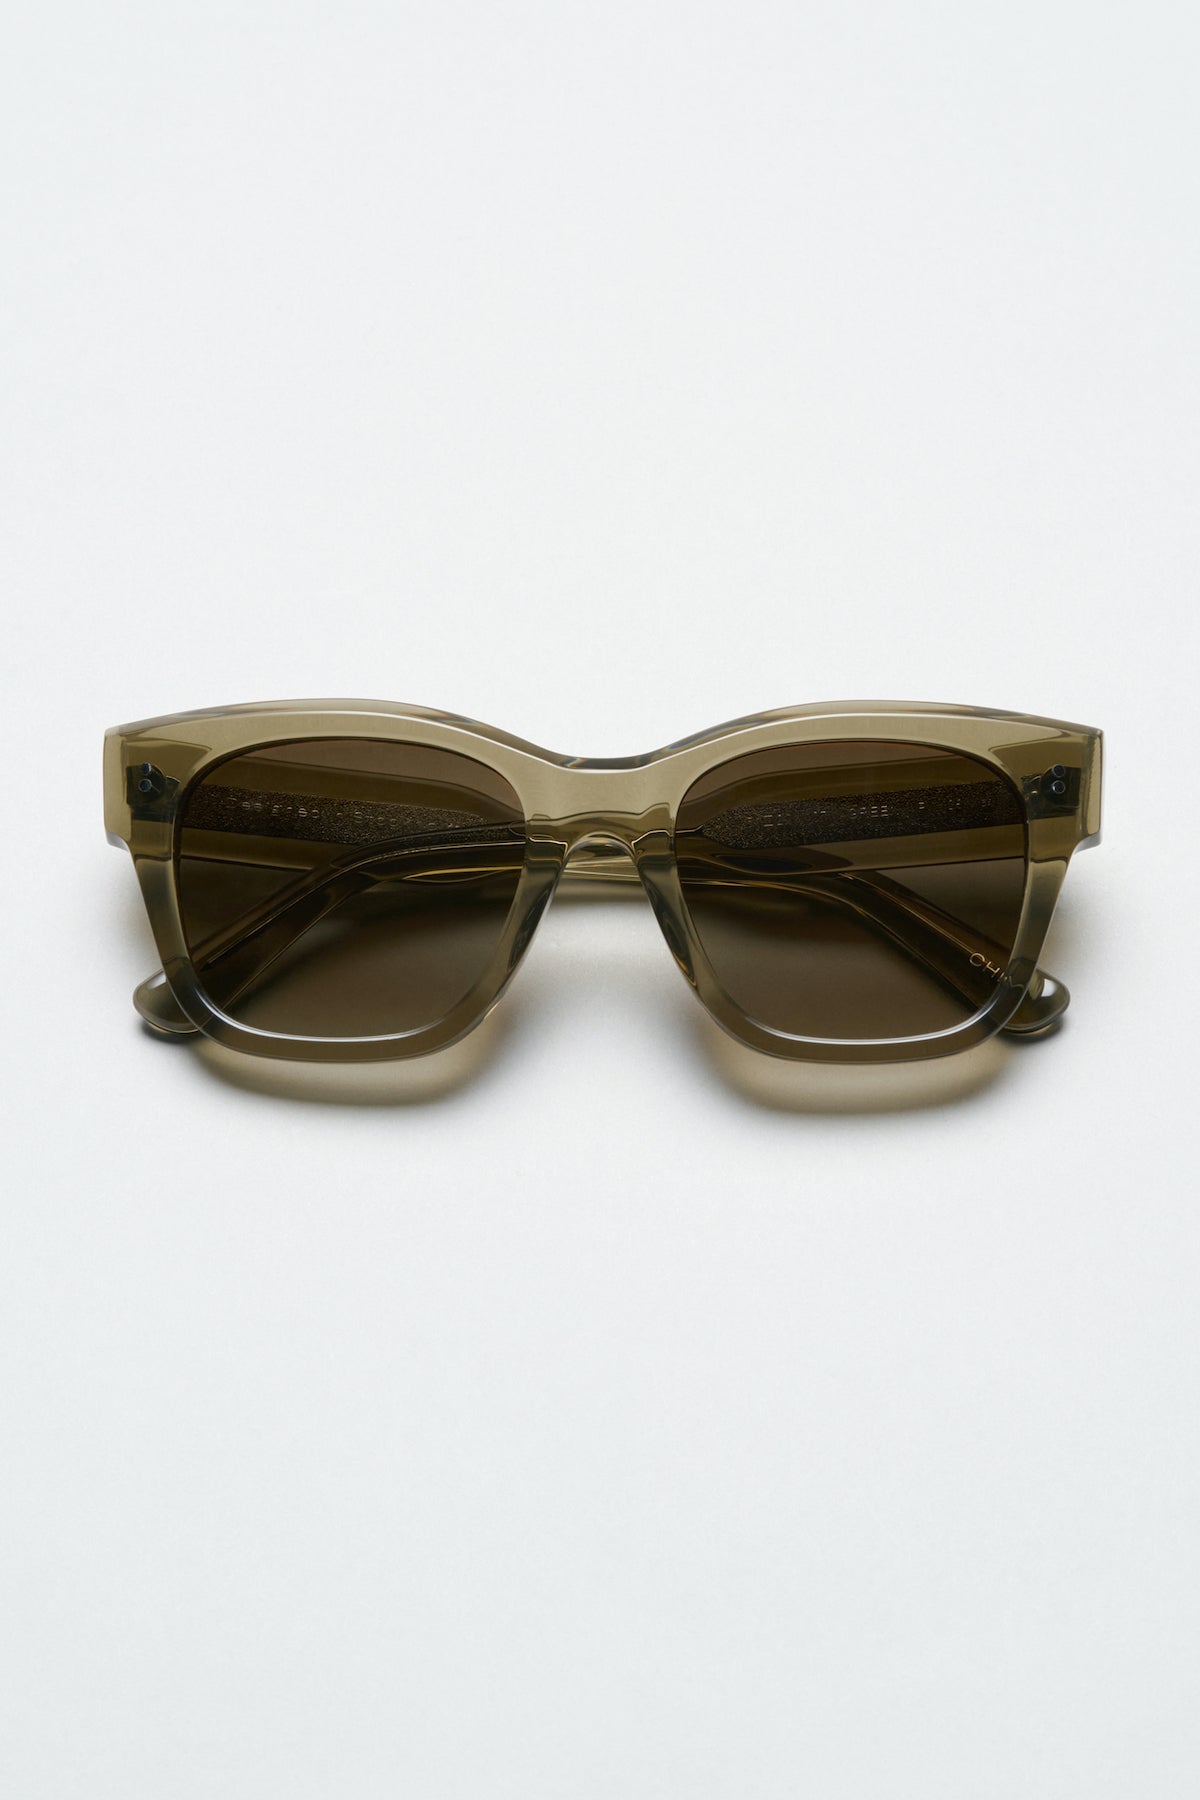   7.2 Chimi Sunglasses Green Front 